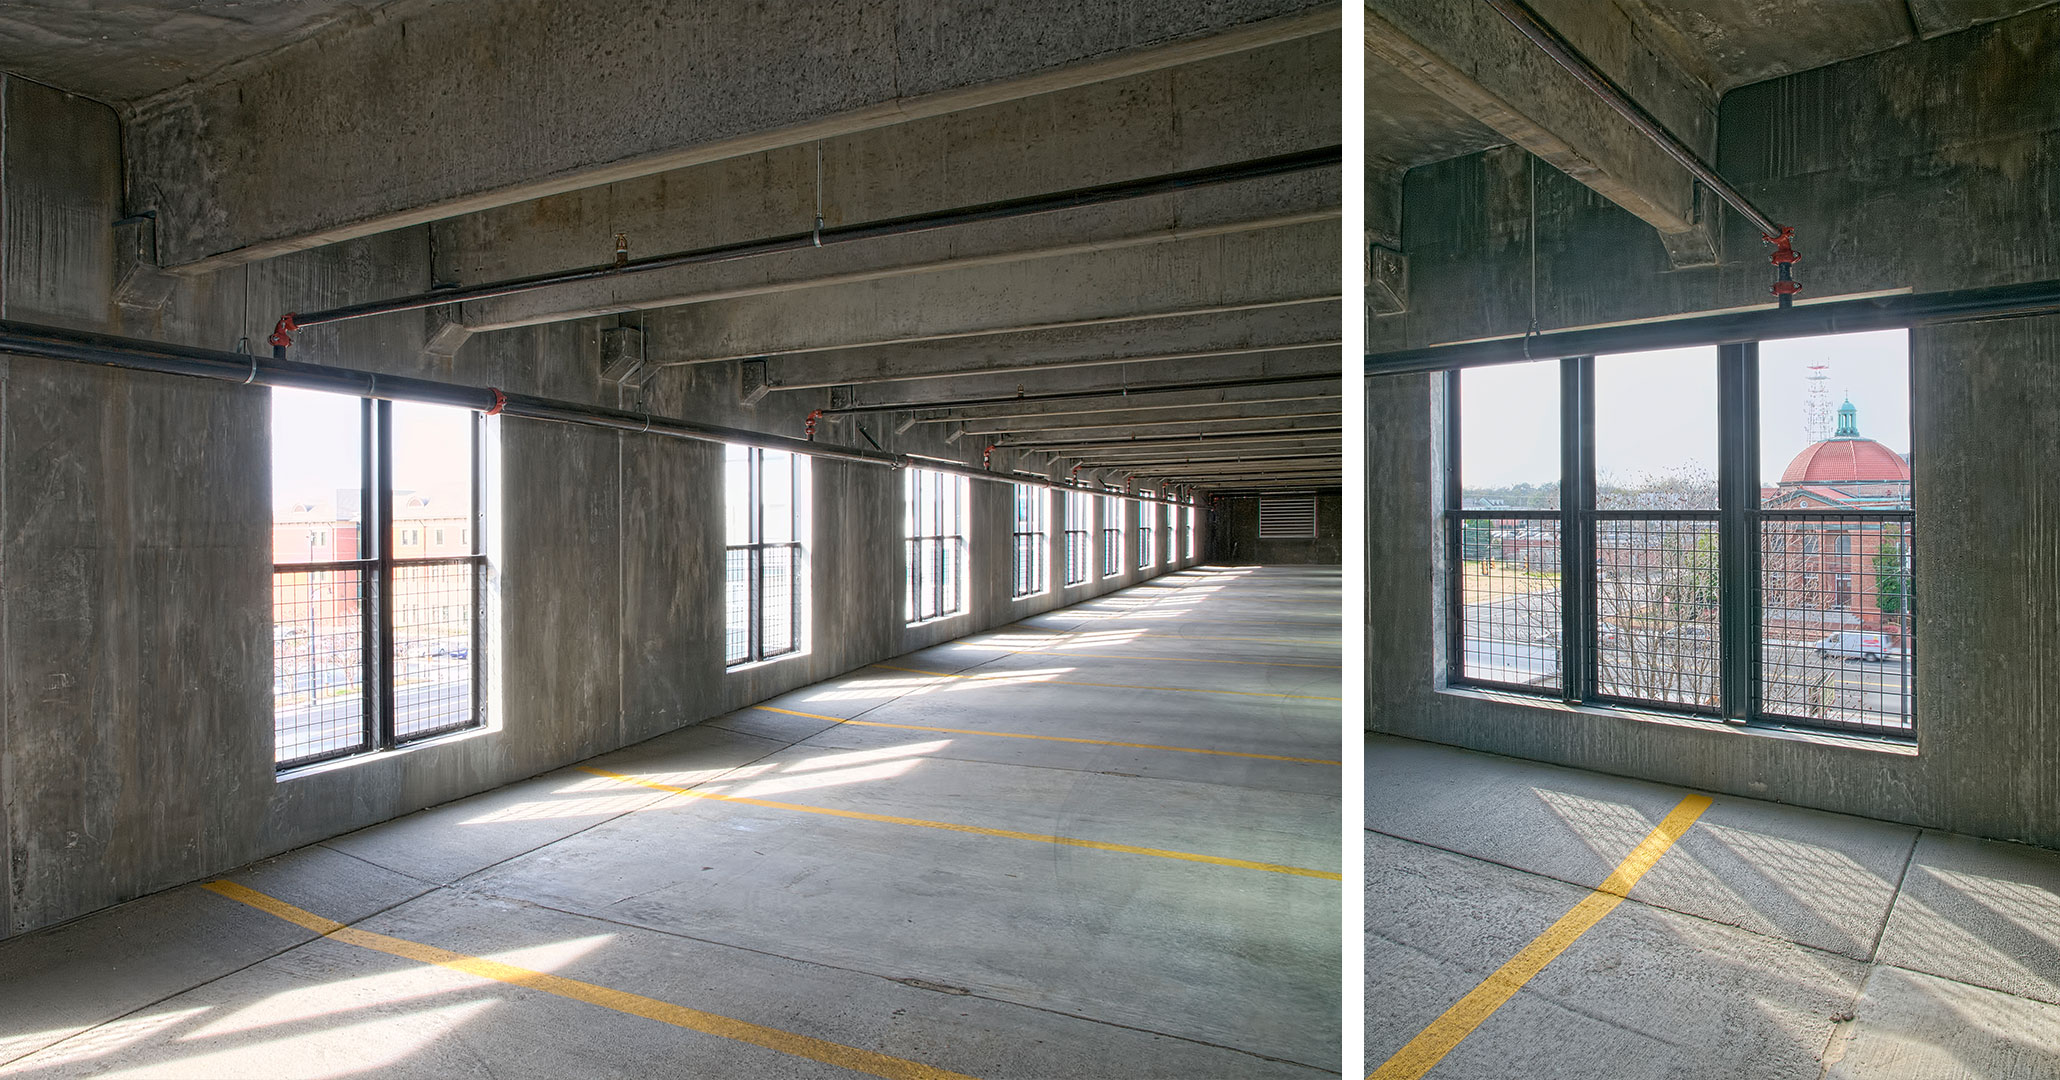 Boudreaux worked with the City of Florence to build the Cheves Parking Garage.